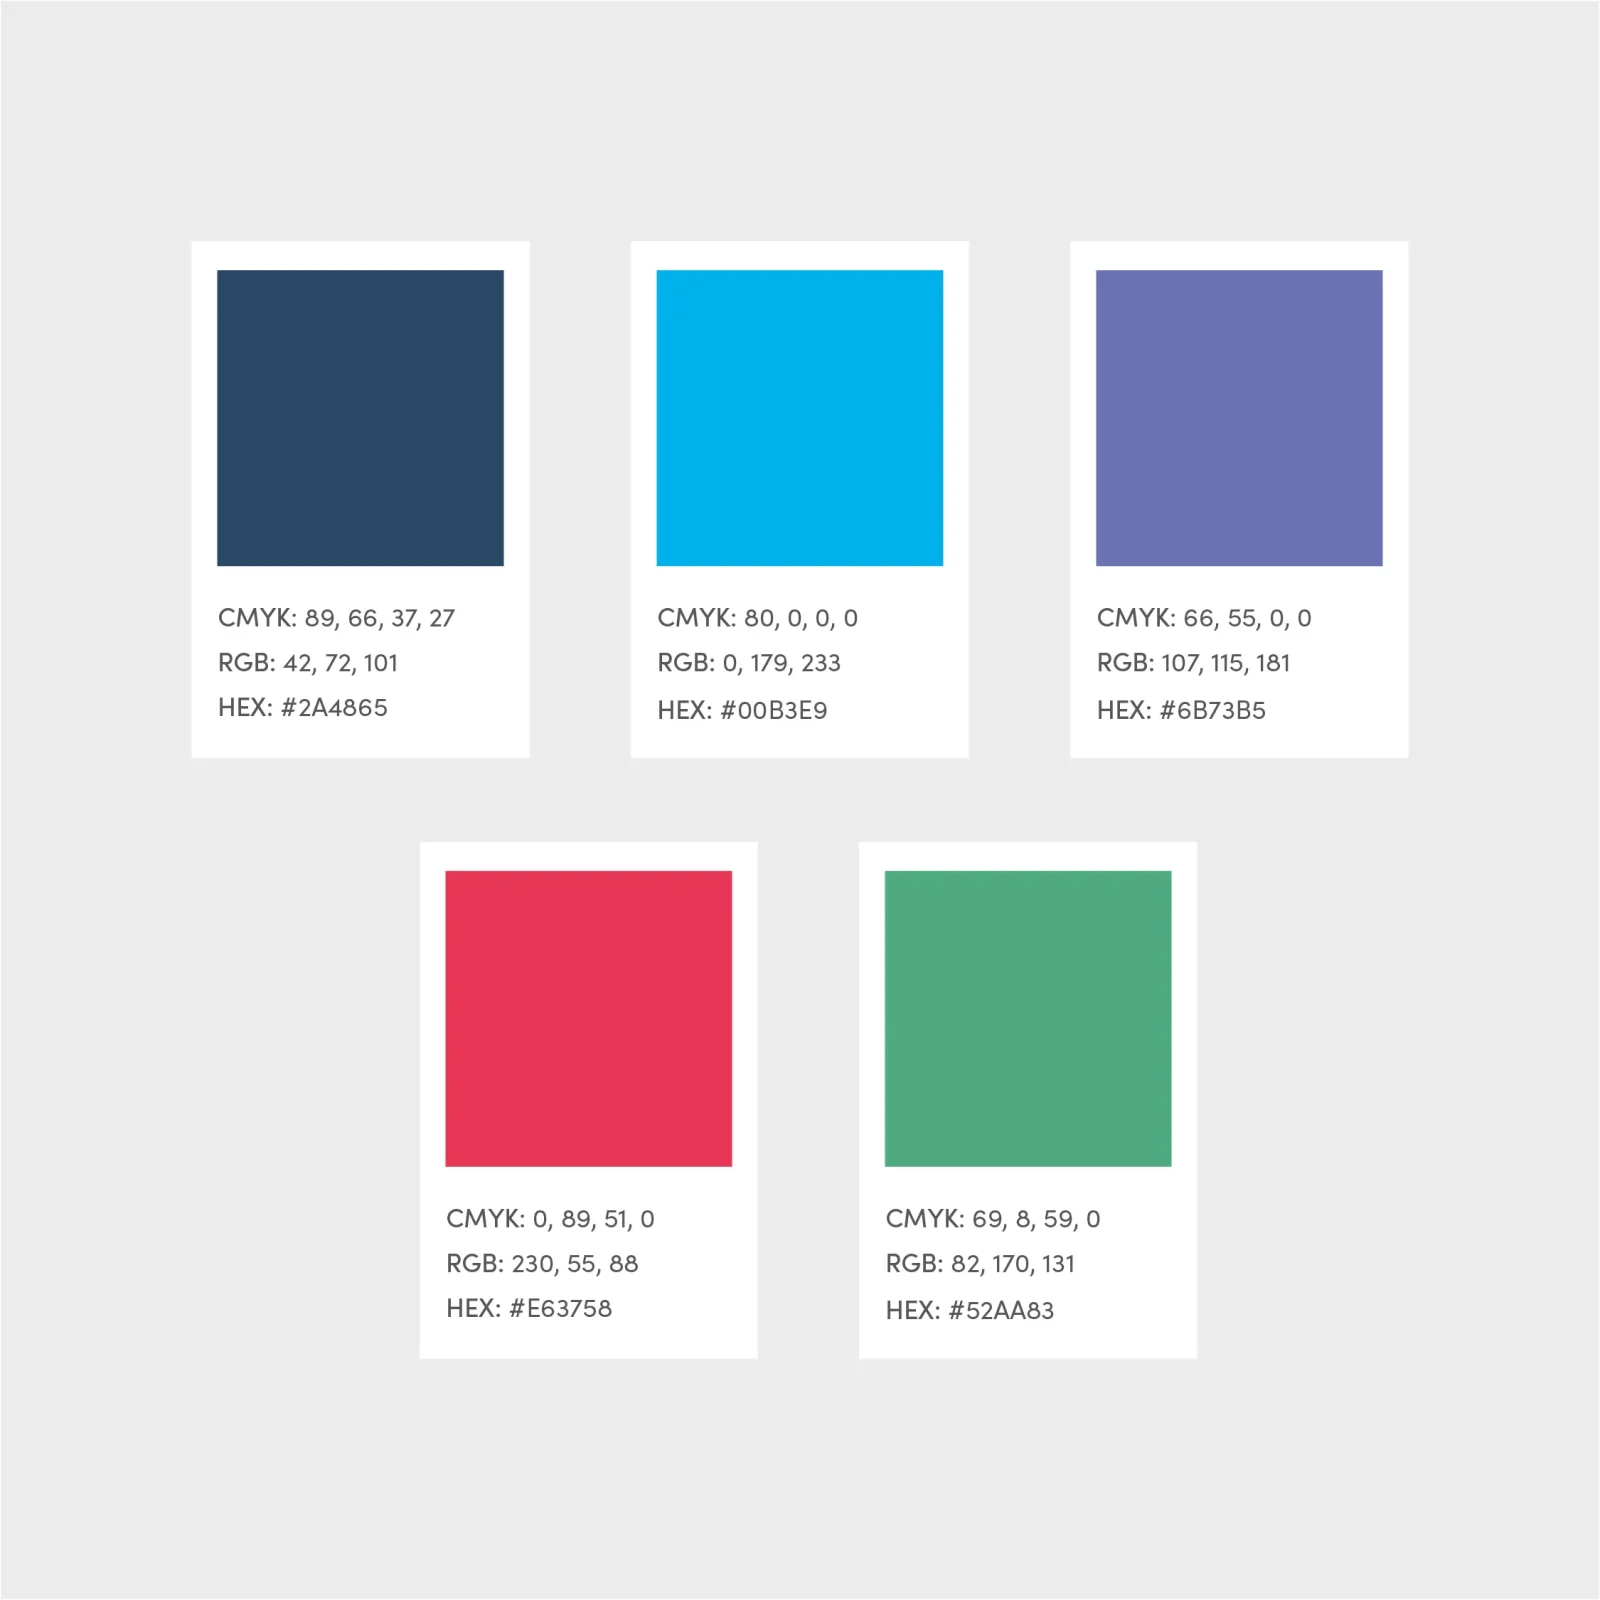 Six colored squares with their corresponding CMYK, RGB, and hex color values tailored for a design agency in Bristol: deep blue, bright blue, purple, red, and two shades of green.